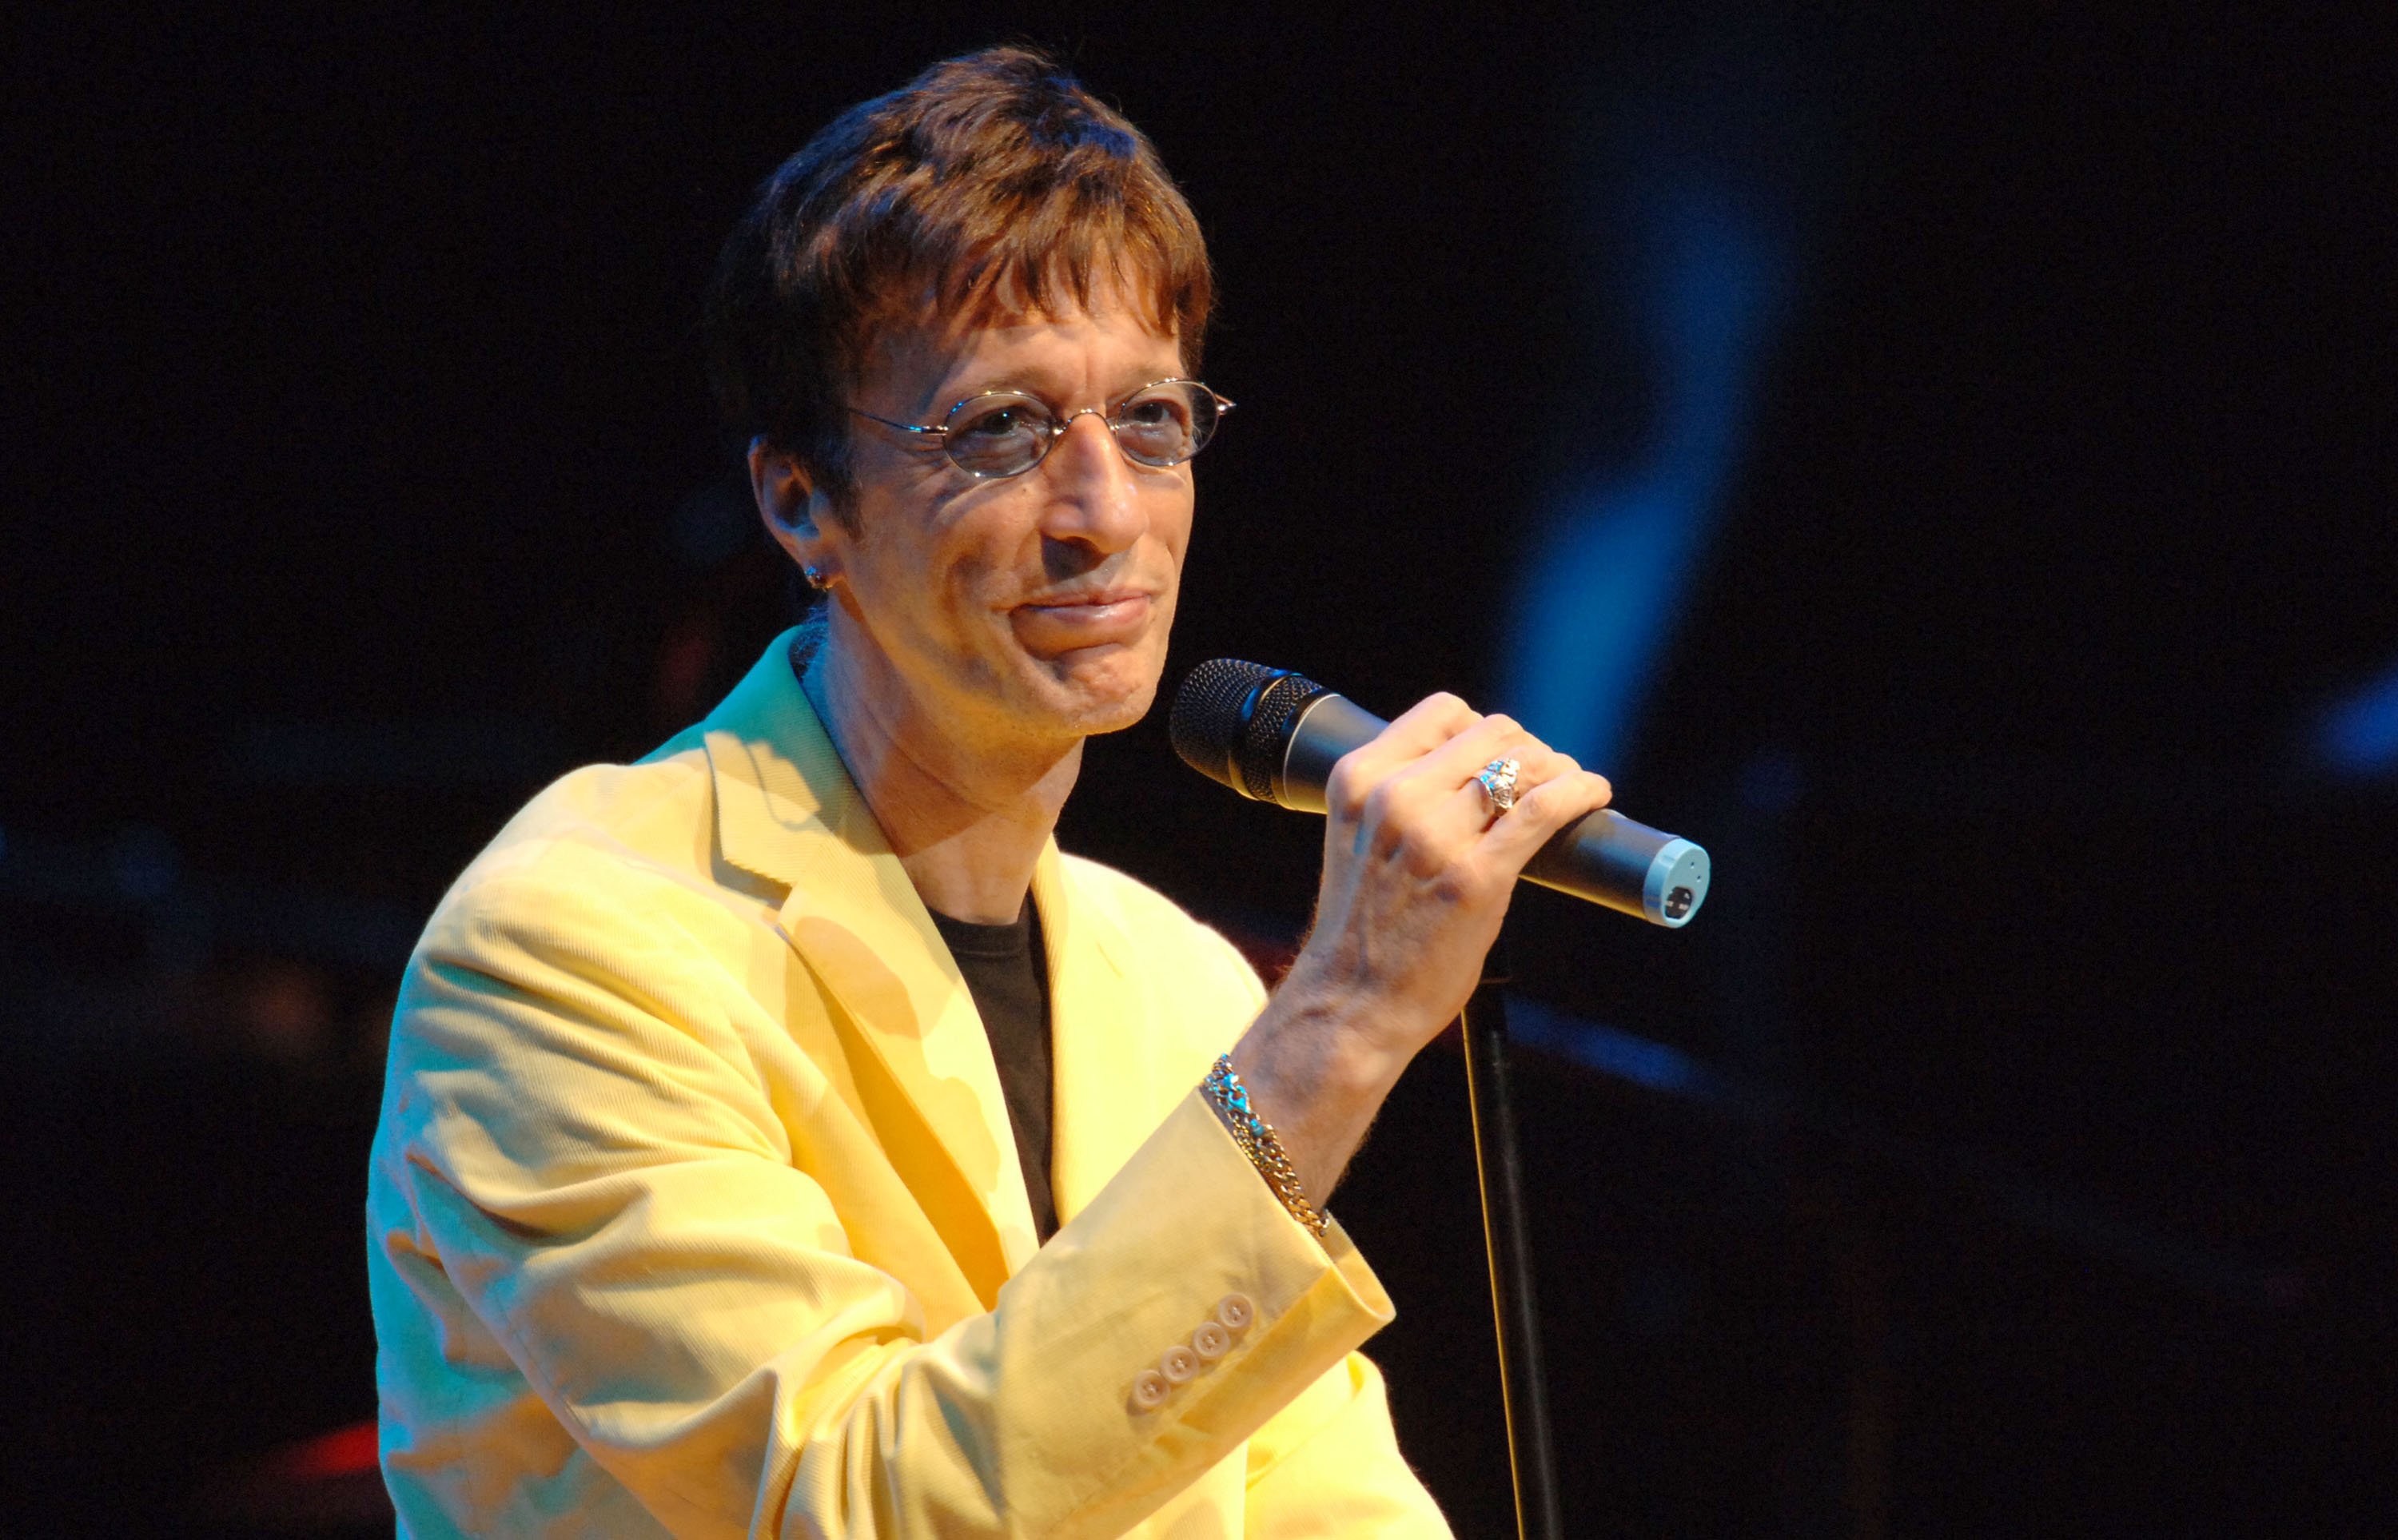 Robin Gibb plus band & orchestra in concert at the Tokyo International Forum in September 3, 2005 in Tokyo, Japan | Photo: Getty Images